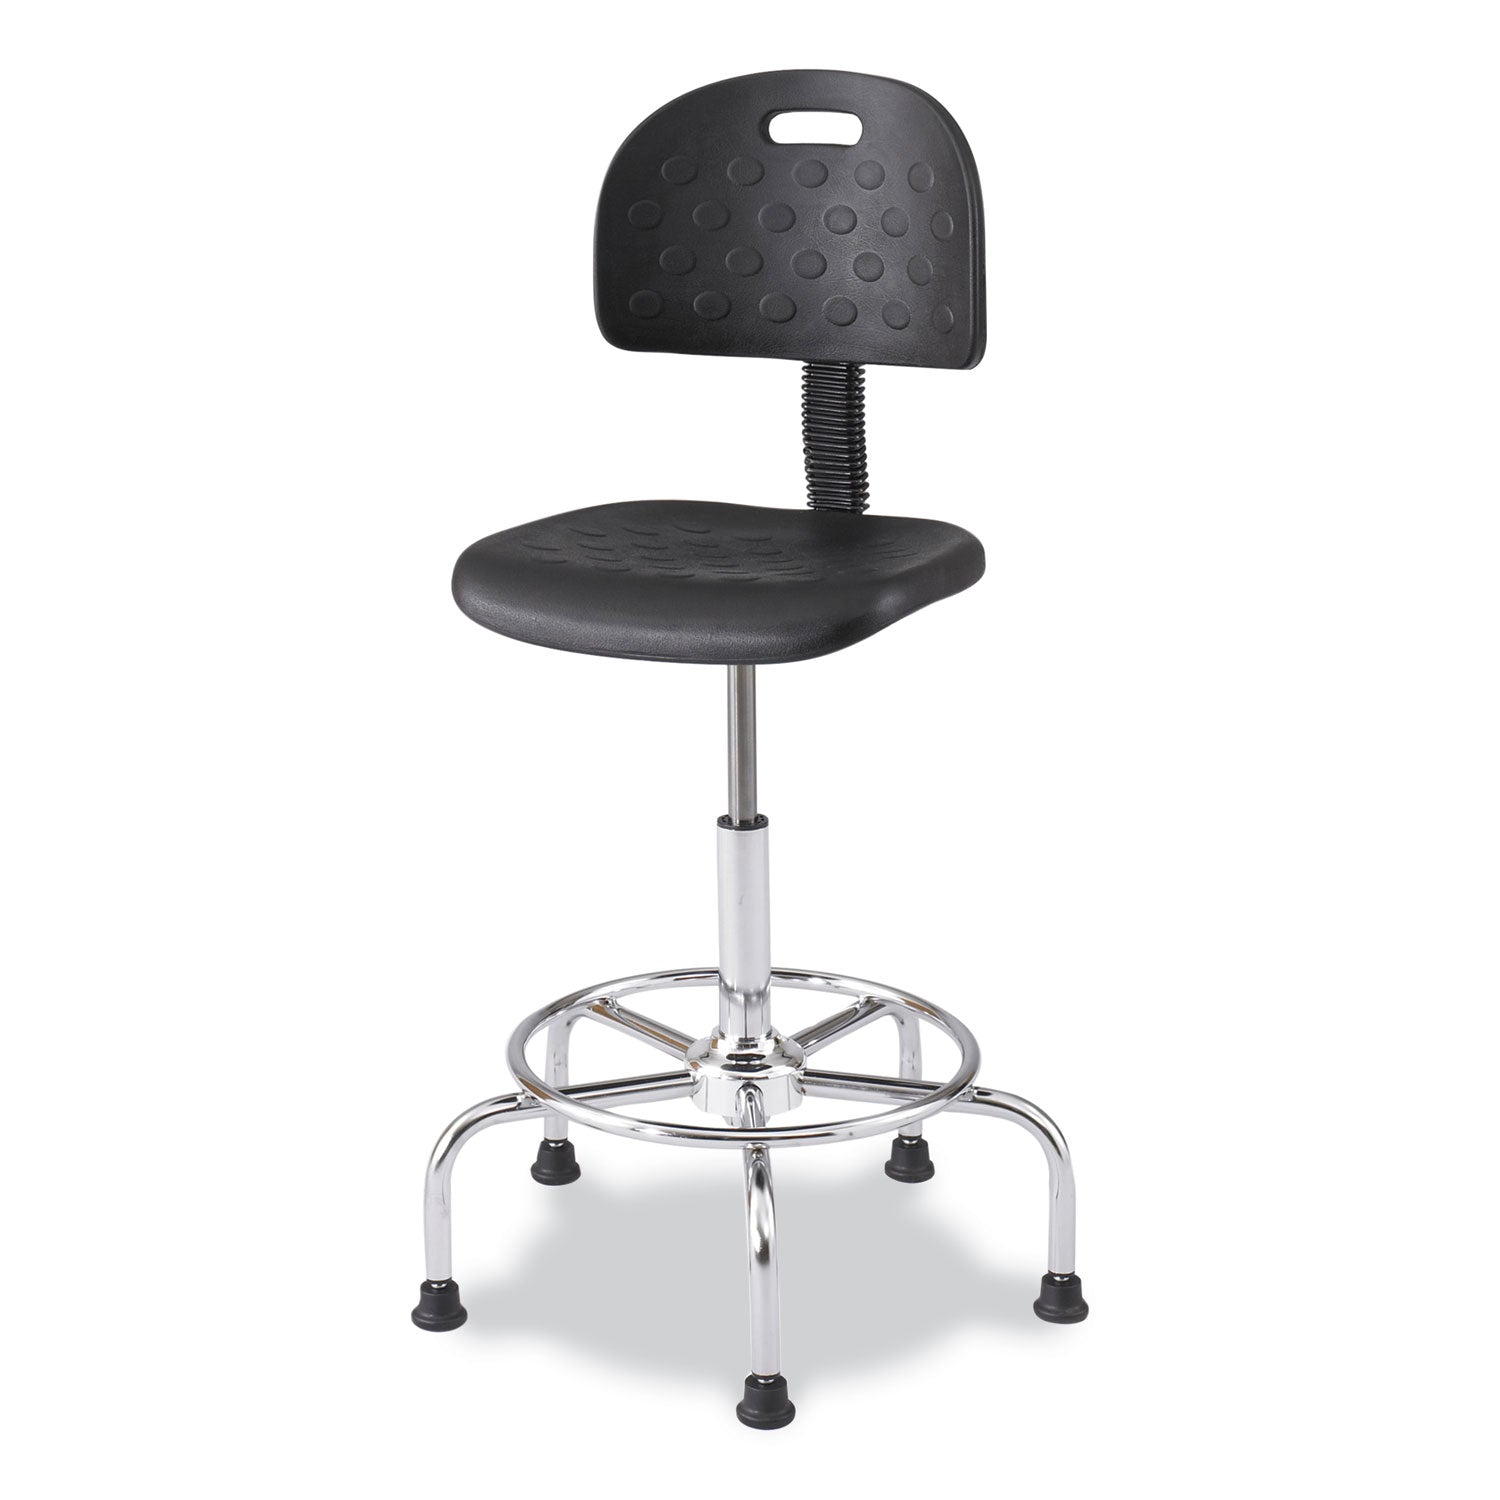 workfit-economy-industrial-chair-up-to-400-lb-22-to-30-high-black-seat-back-silver-base-ships-in-1-3-business-days_saf6950bl - 2